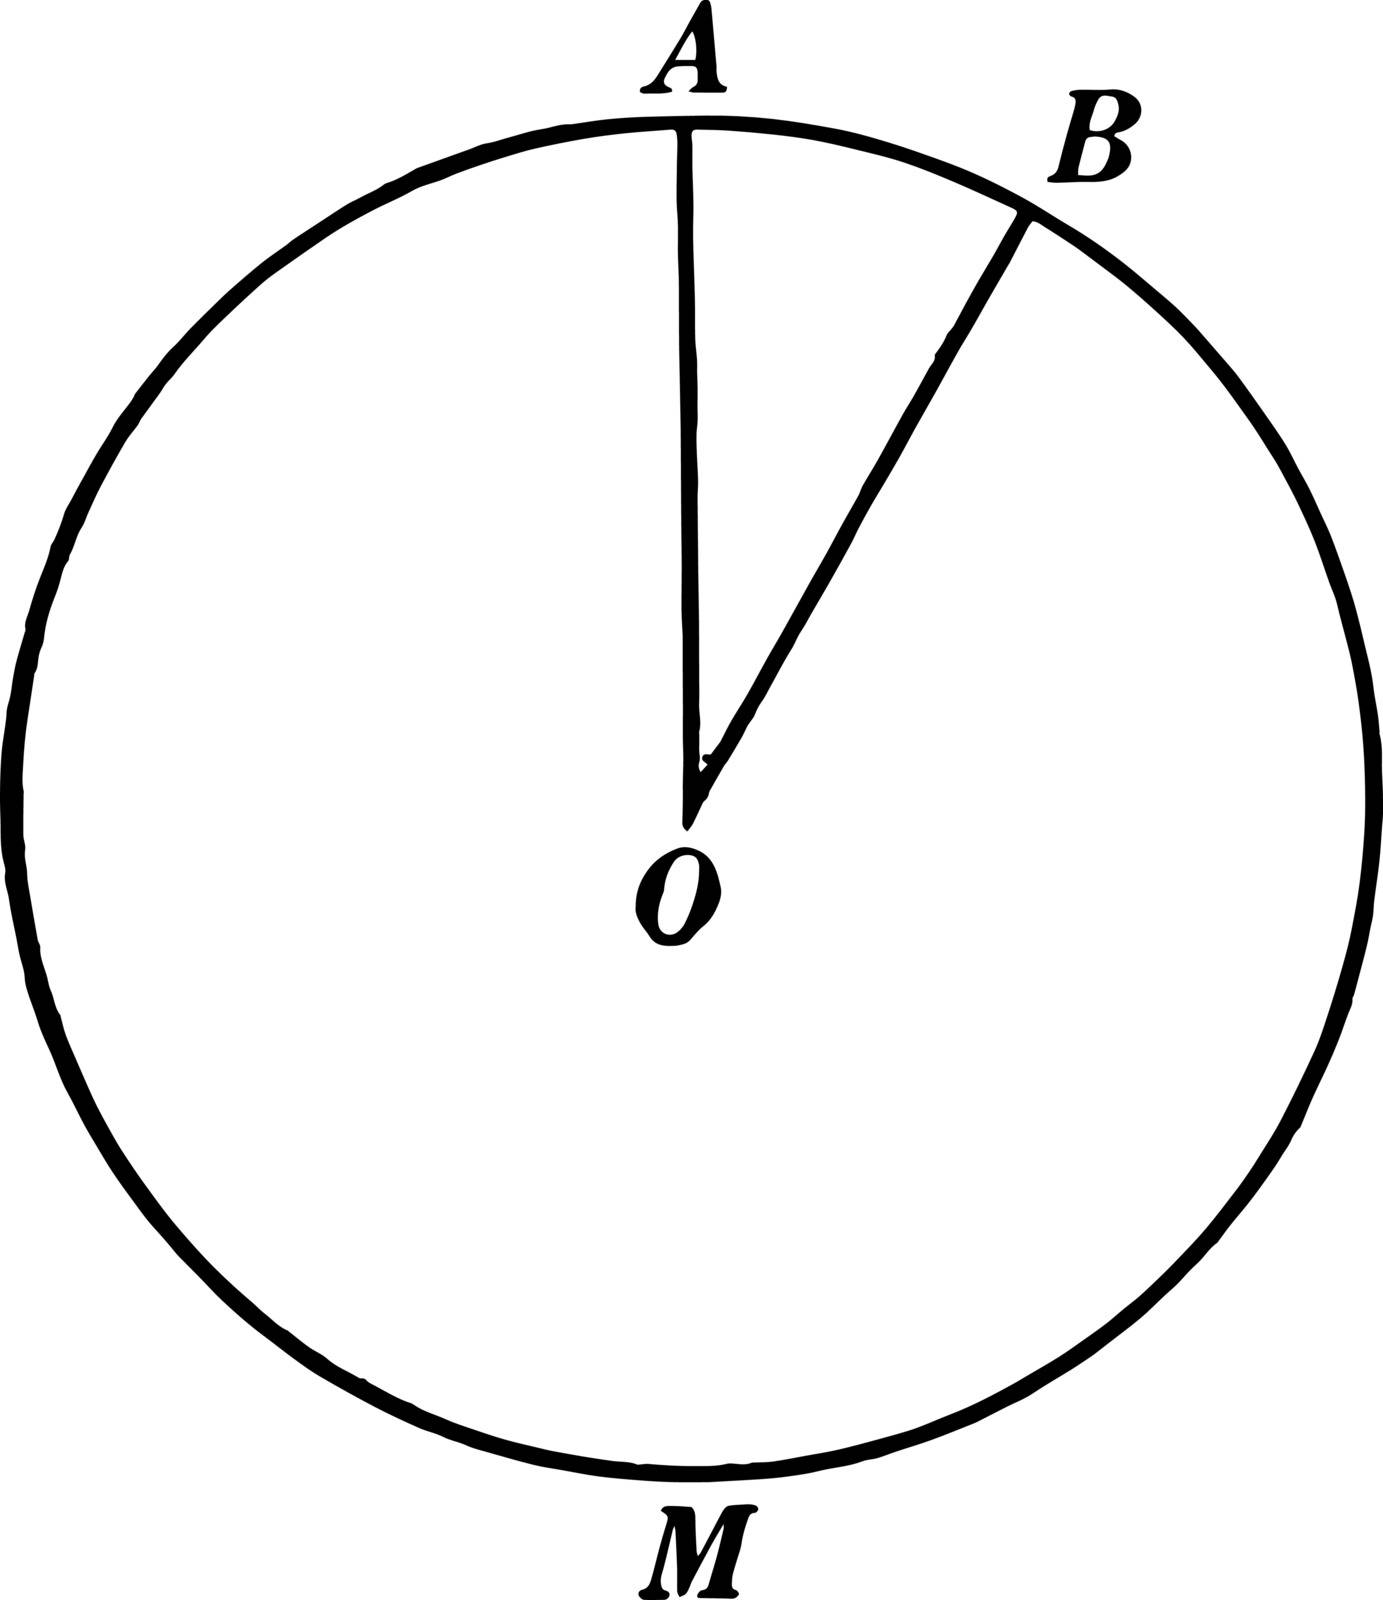 A diagram of a circle with central angle AOB drawn and labeled, vintage line drawing or engraving illustration.